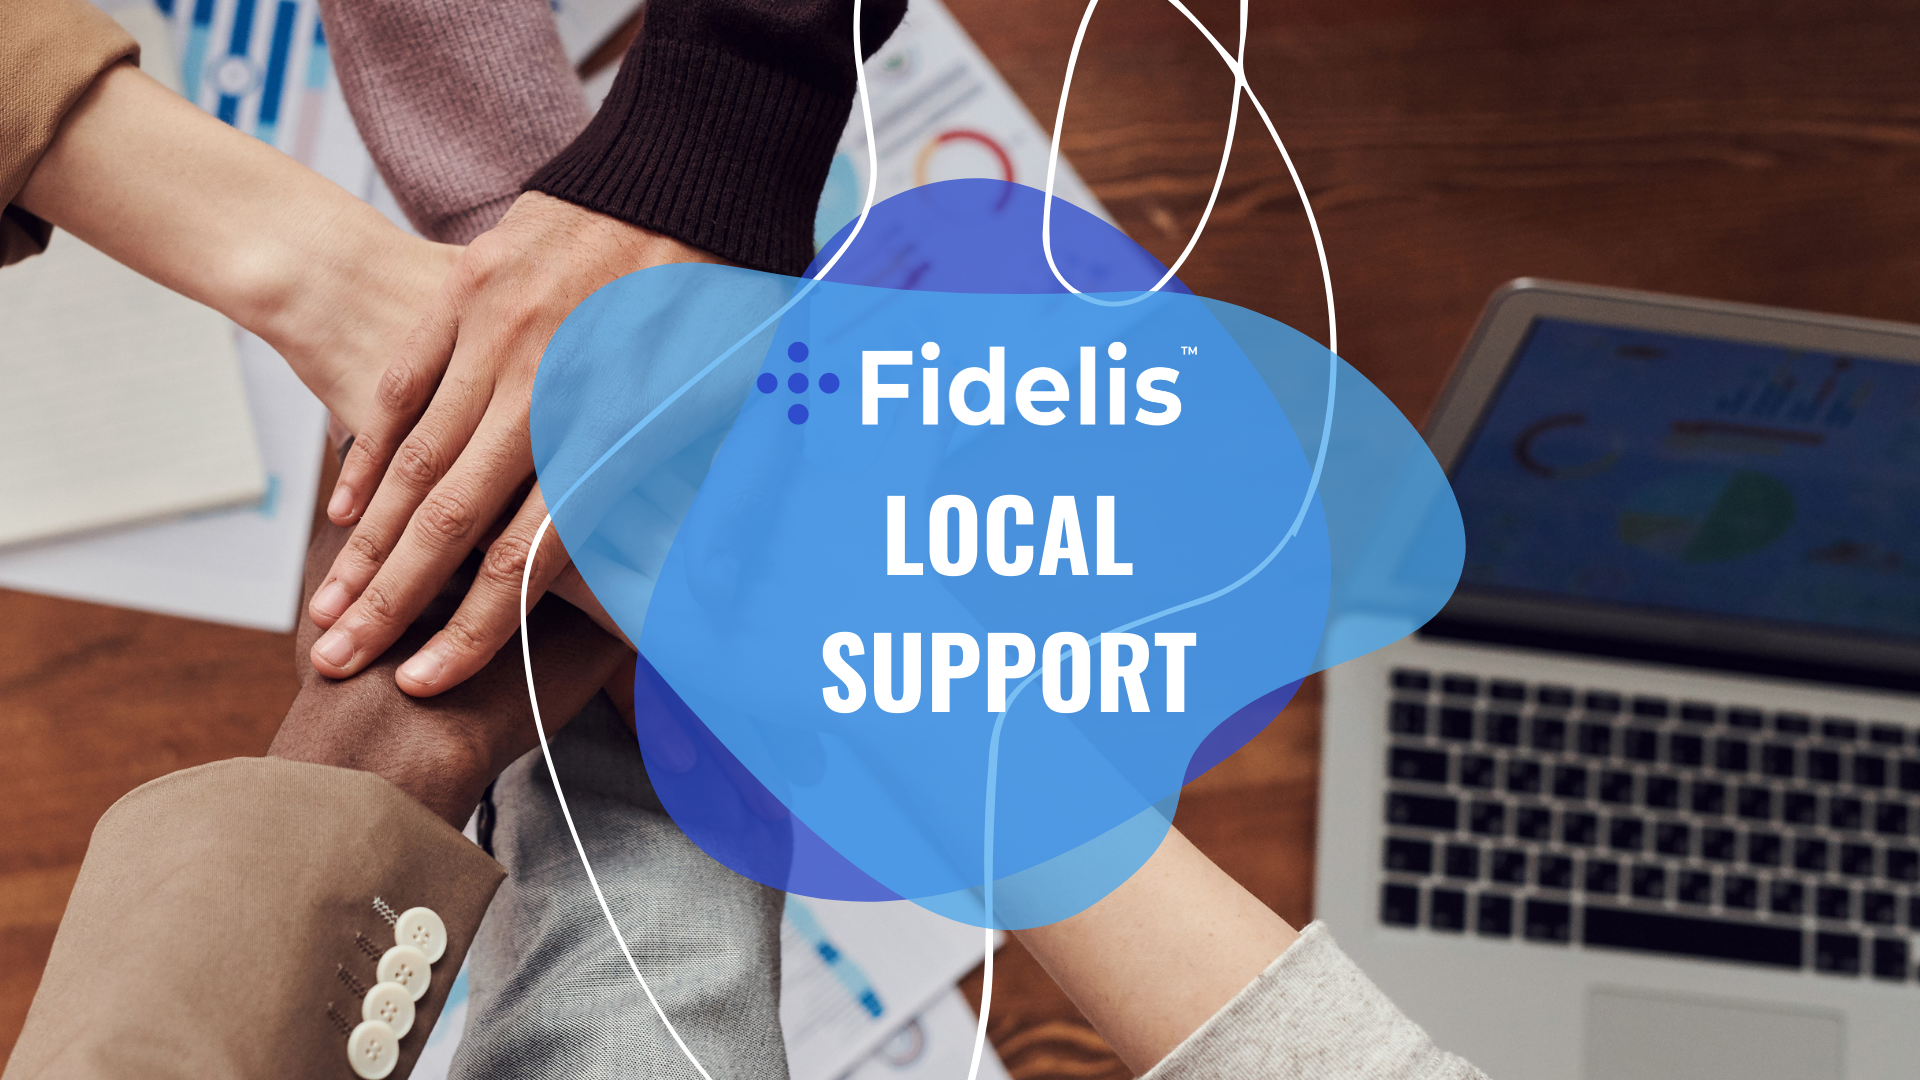 Fidelis Local Support